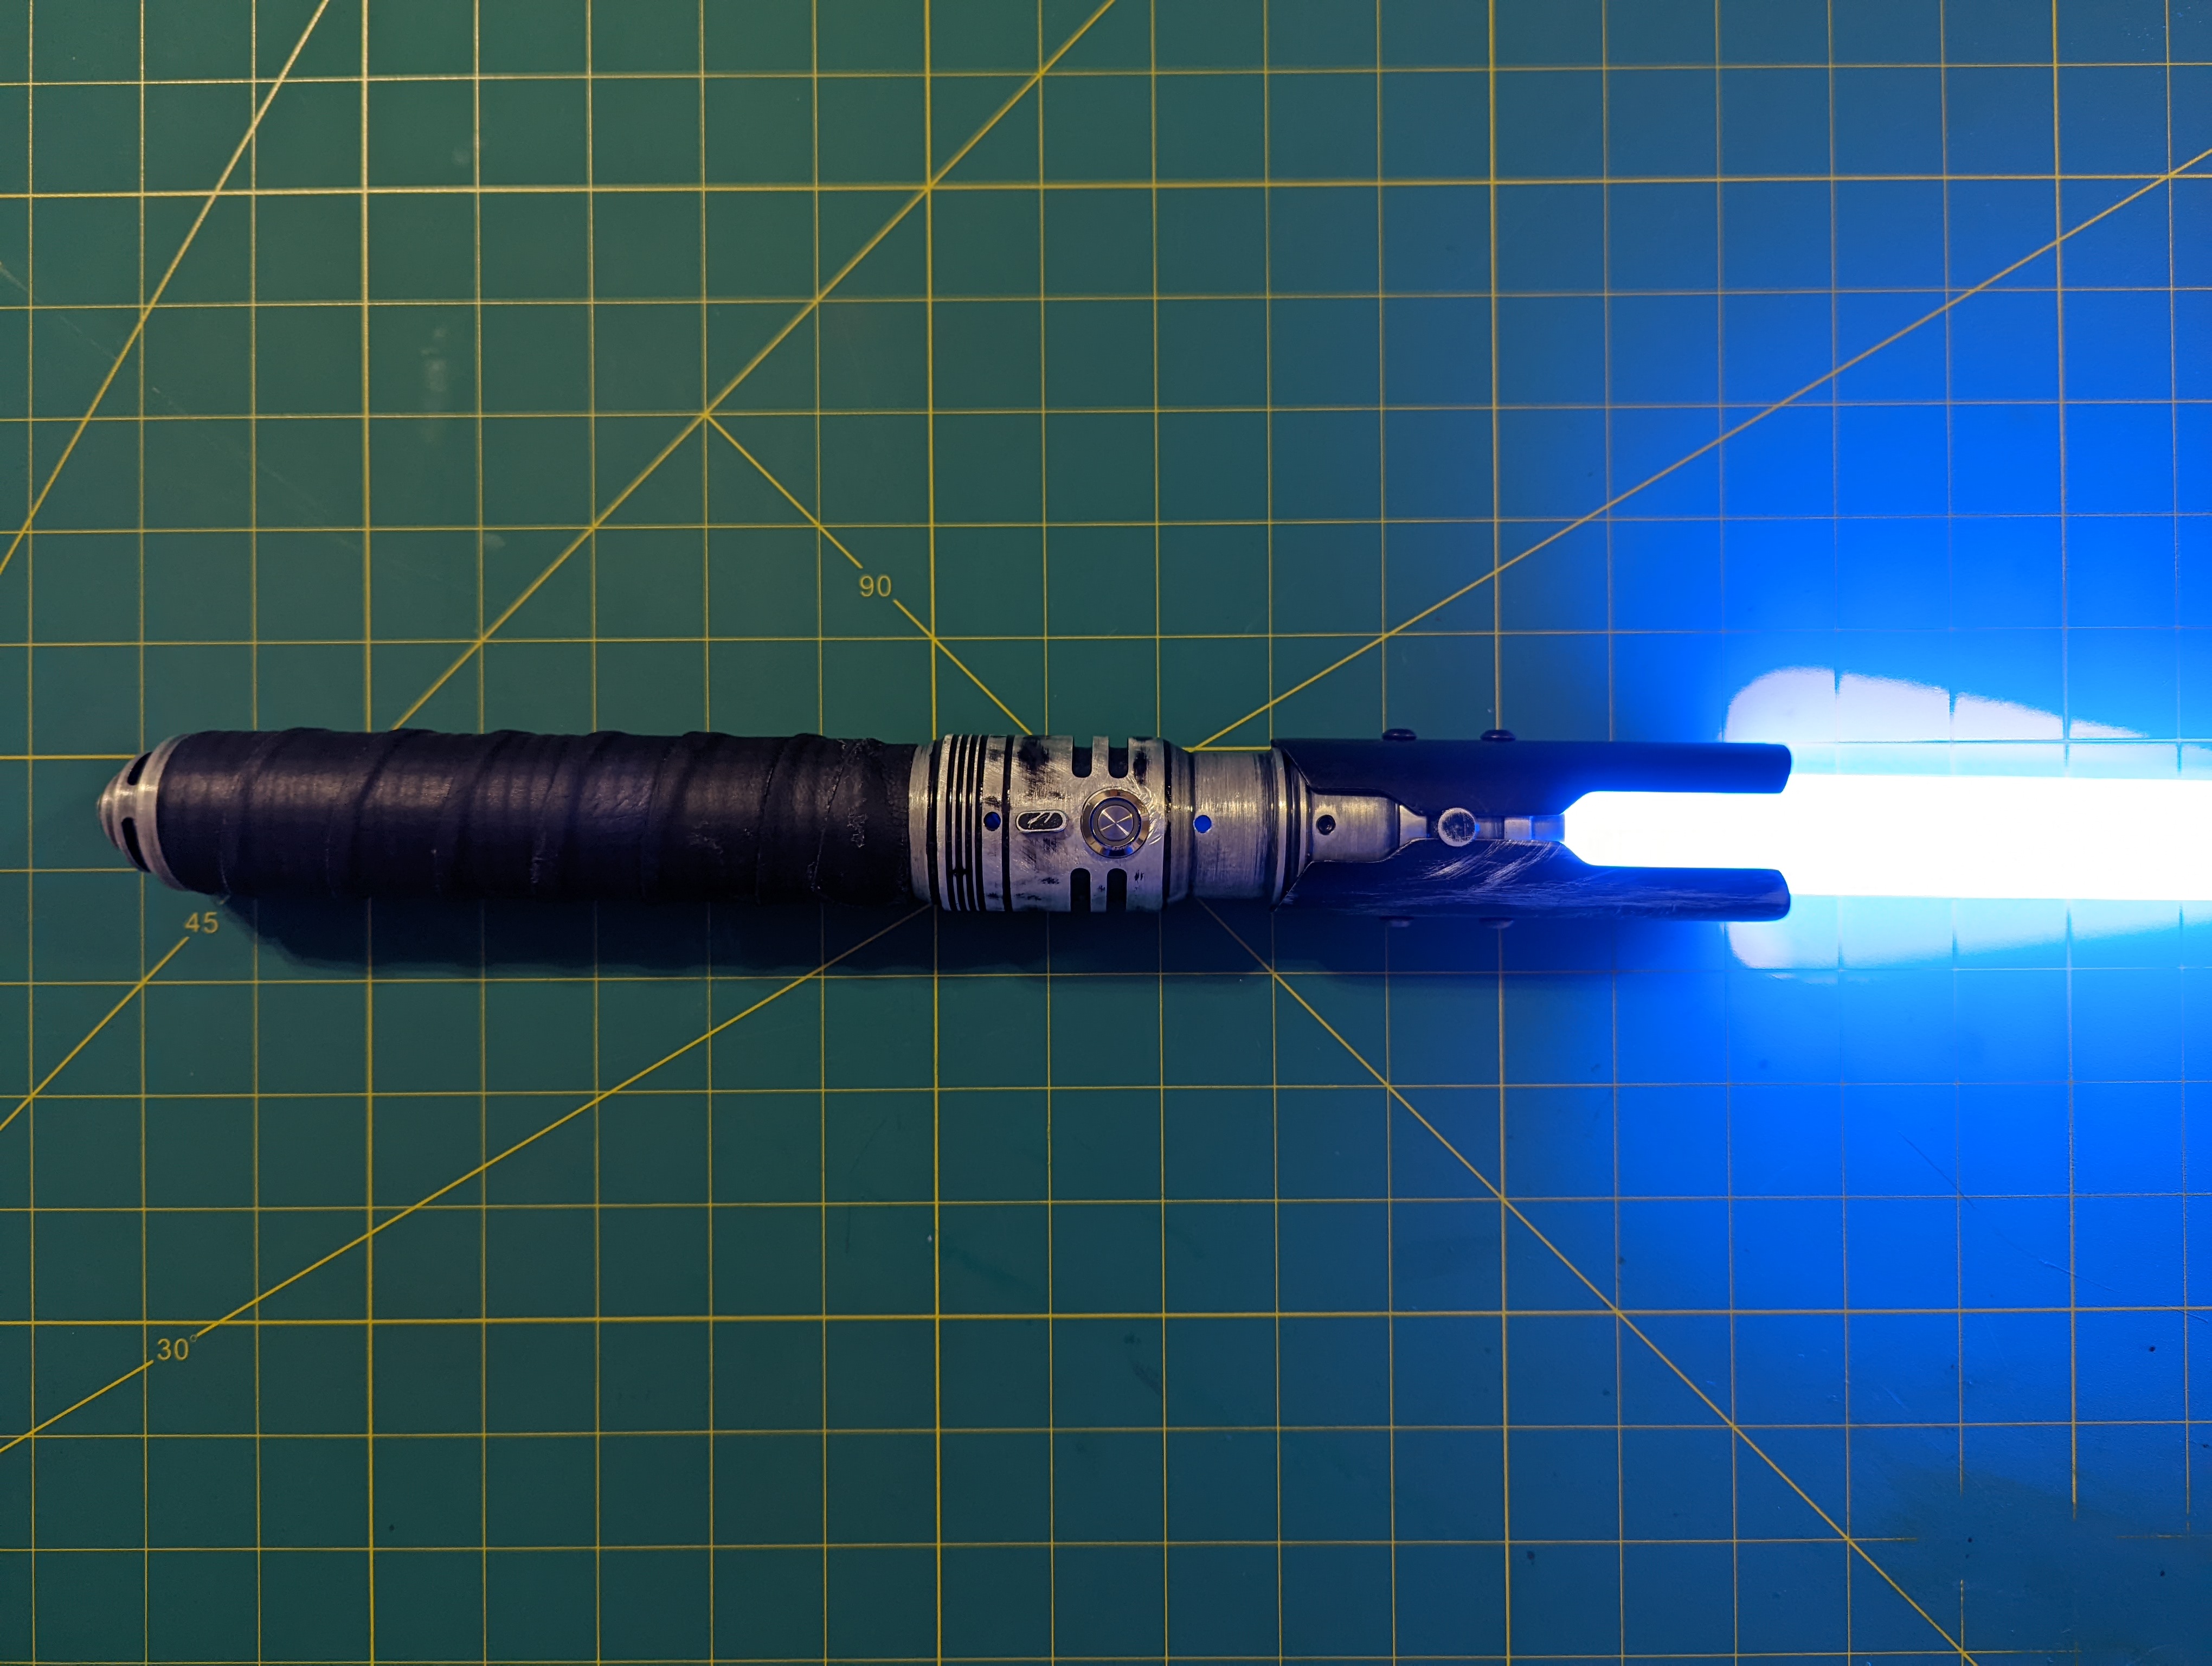 My completed lightsaber